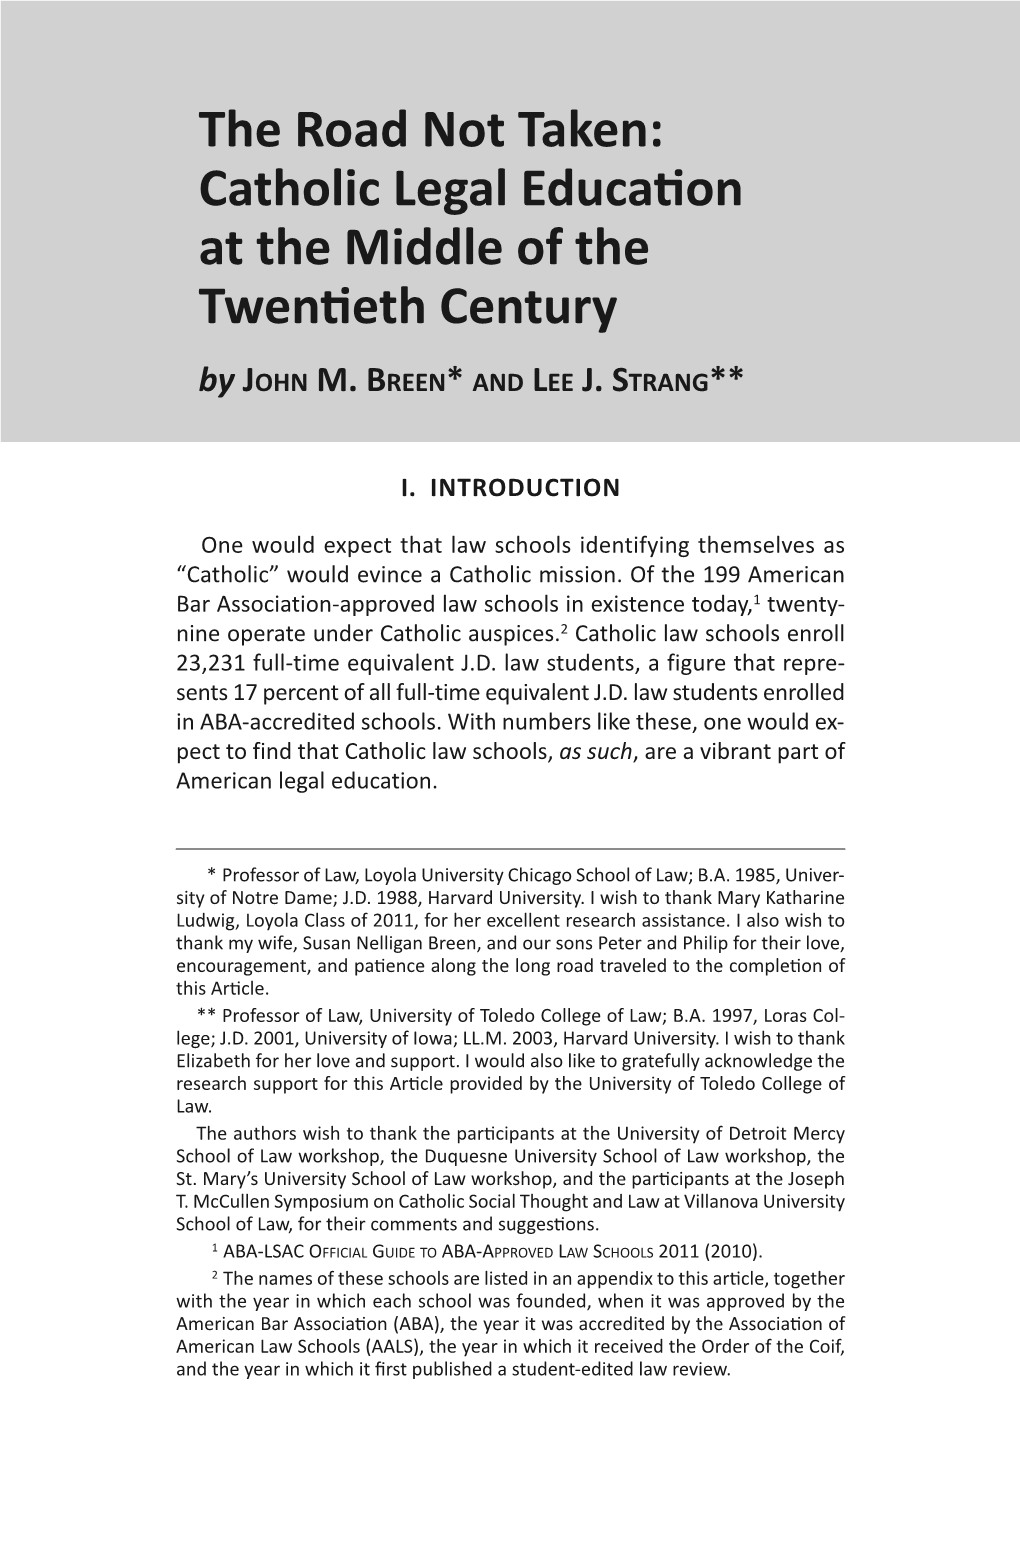 The Road Not Taken: Catholic Legal Education at the Middle of the Twentieth Century